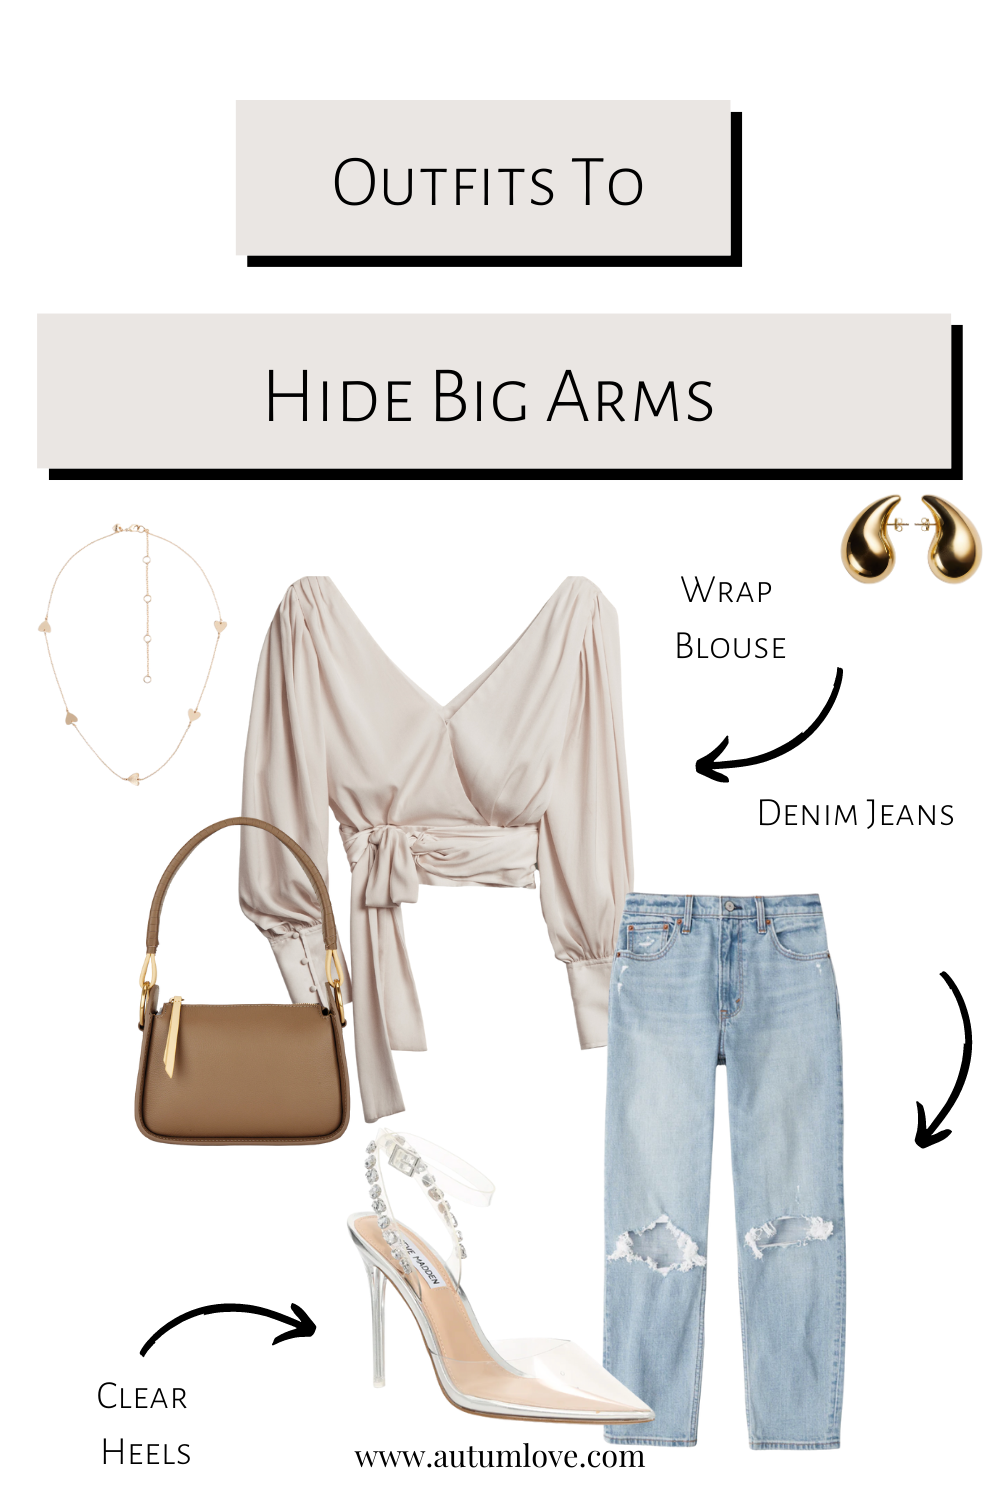 What to Wear (and Not Wear!) to Make Big Arms Look Slimmer — Autum Love